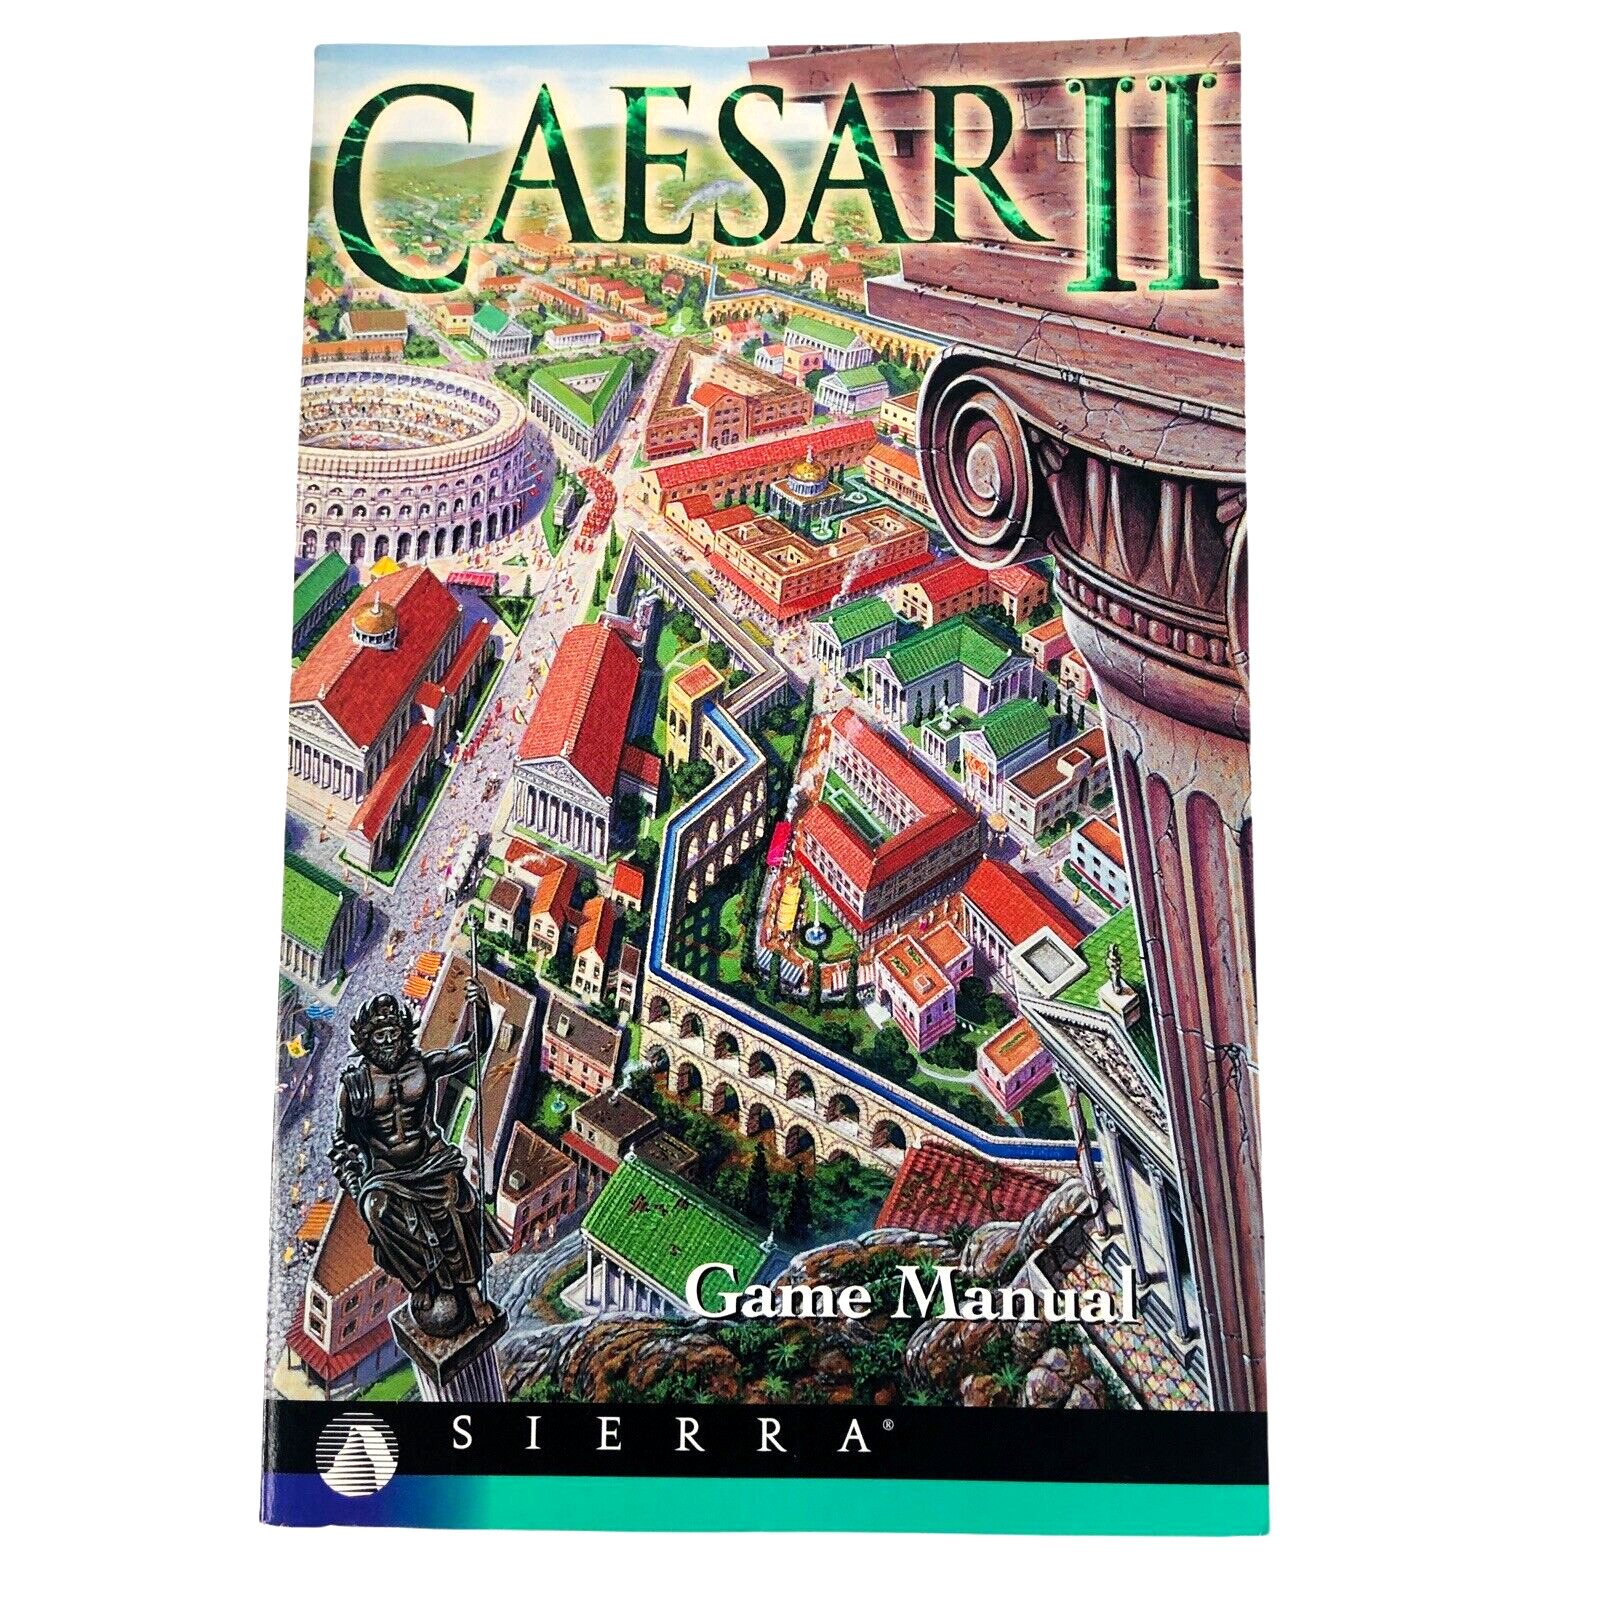 Caesar II Game Manual For Sierra RPG Strategy Reference Softcover Vintage